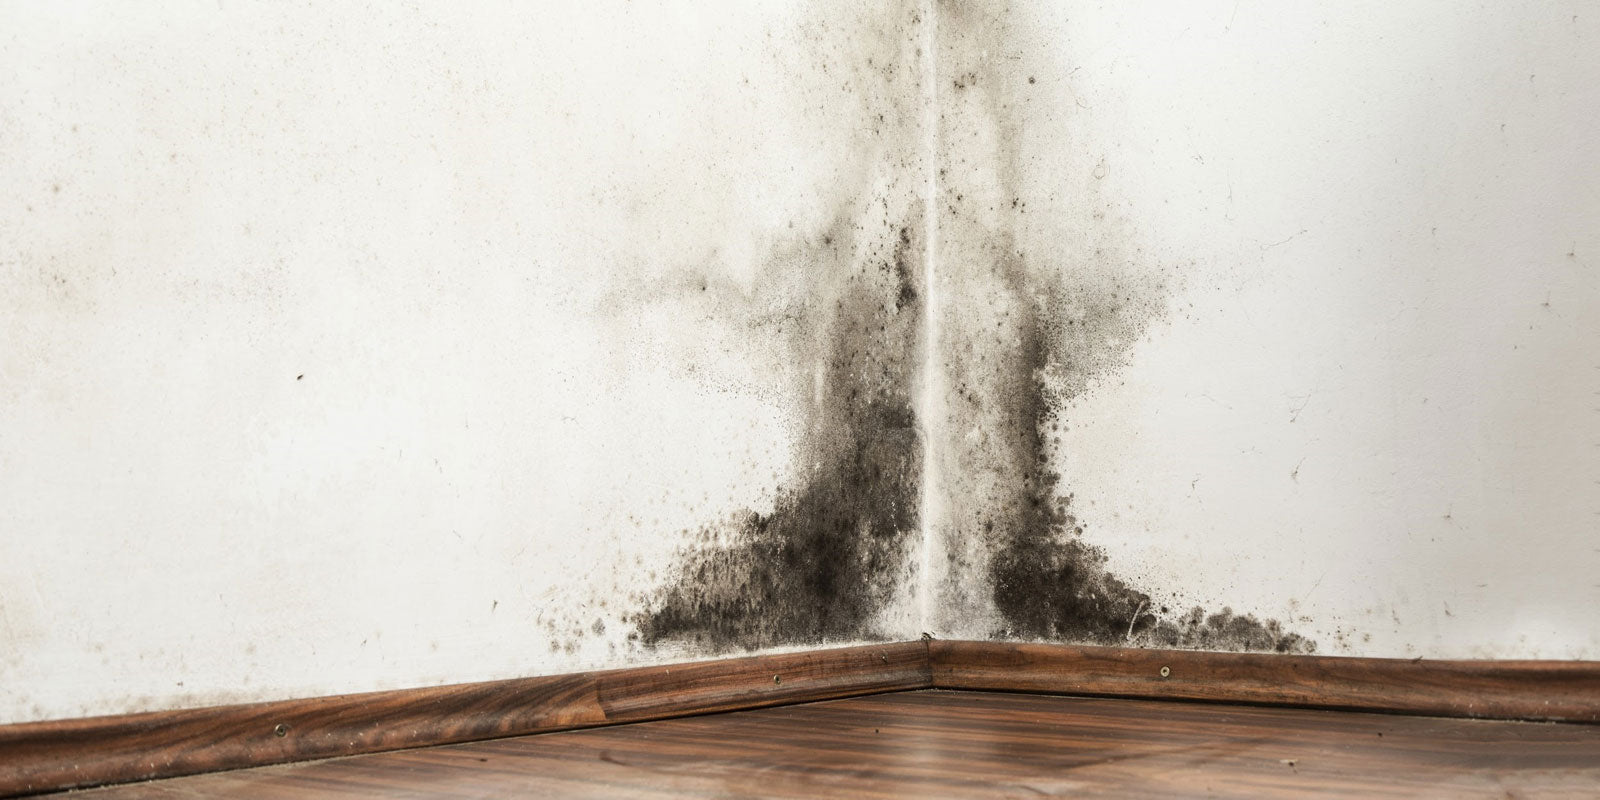 Humidity Control: A Key Factor in Attic Mold Prevention in